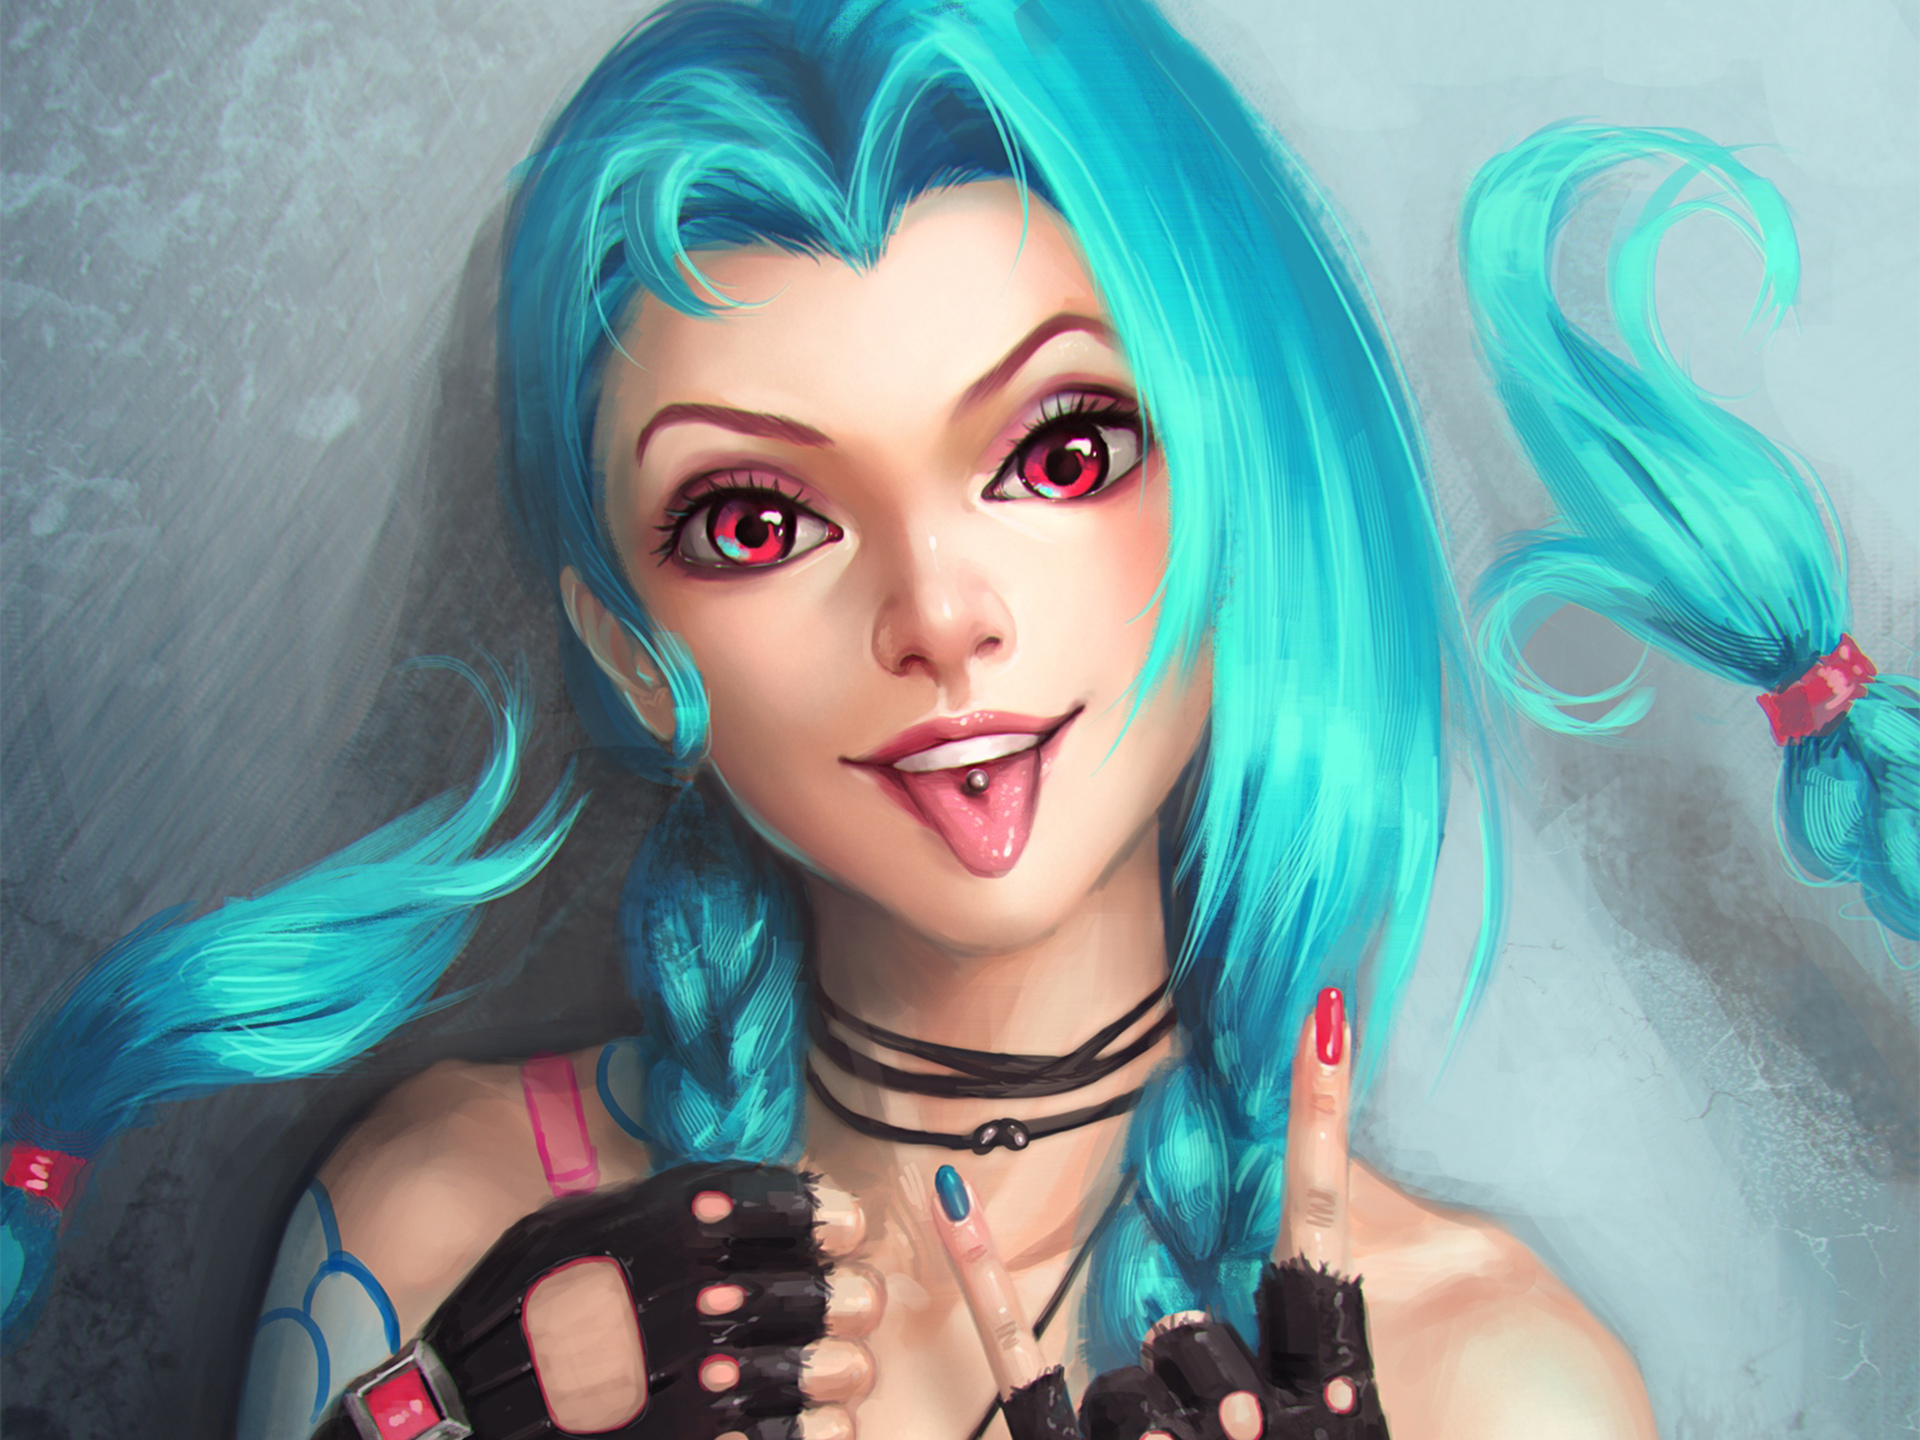 Girl with blue hair Jinks character game League of Legends Desktop  wallpapers 1600x900